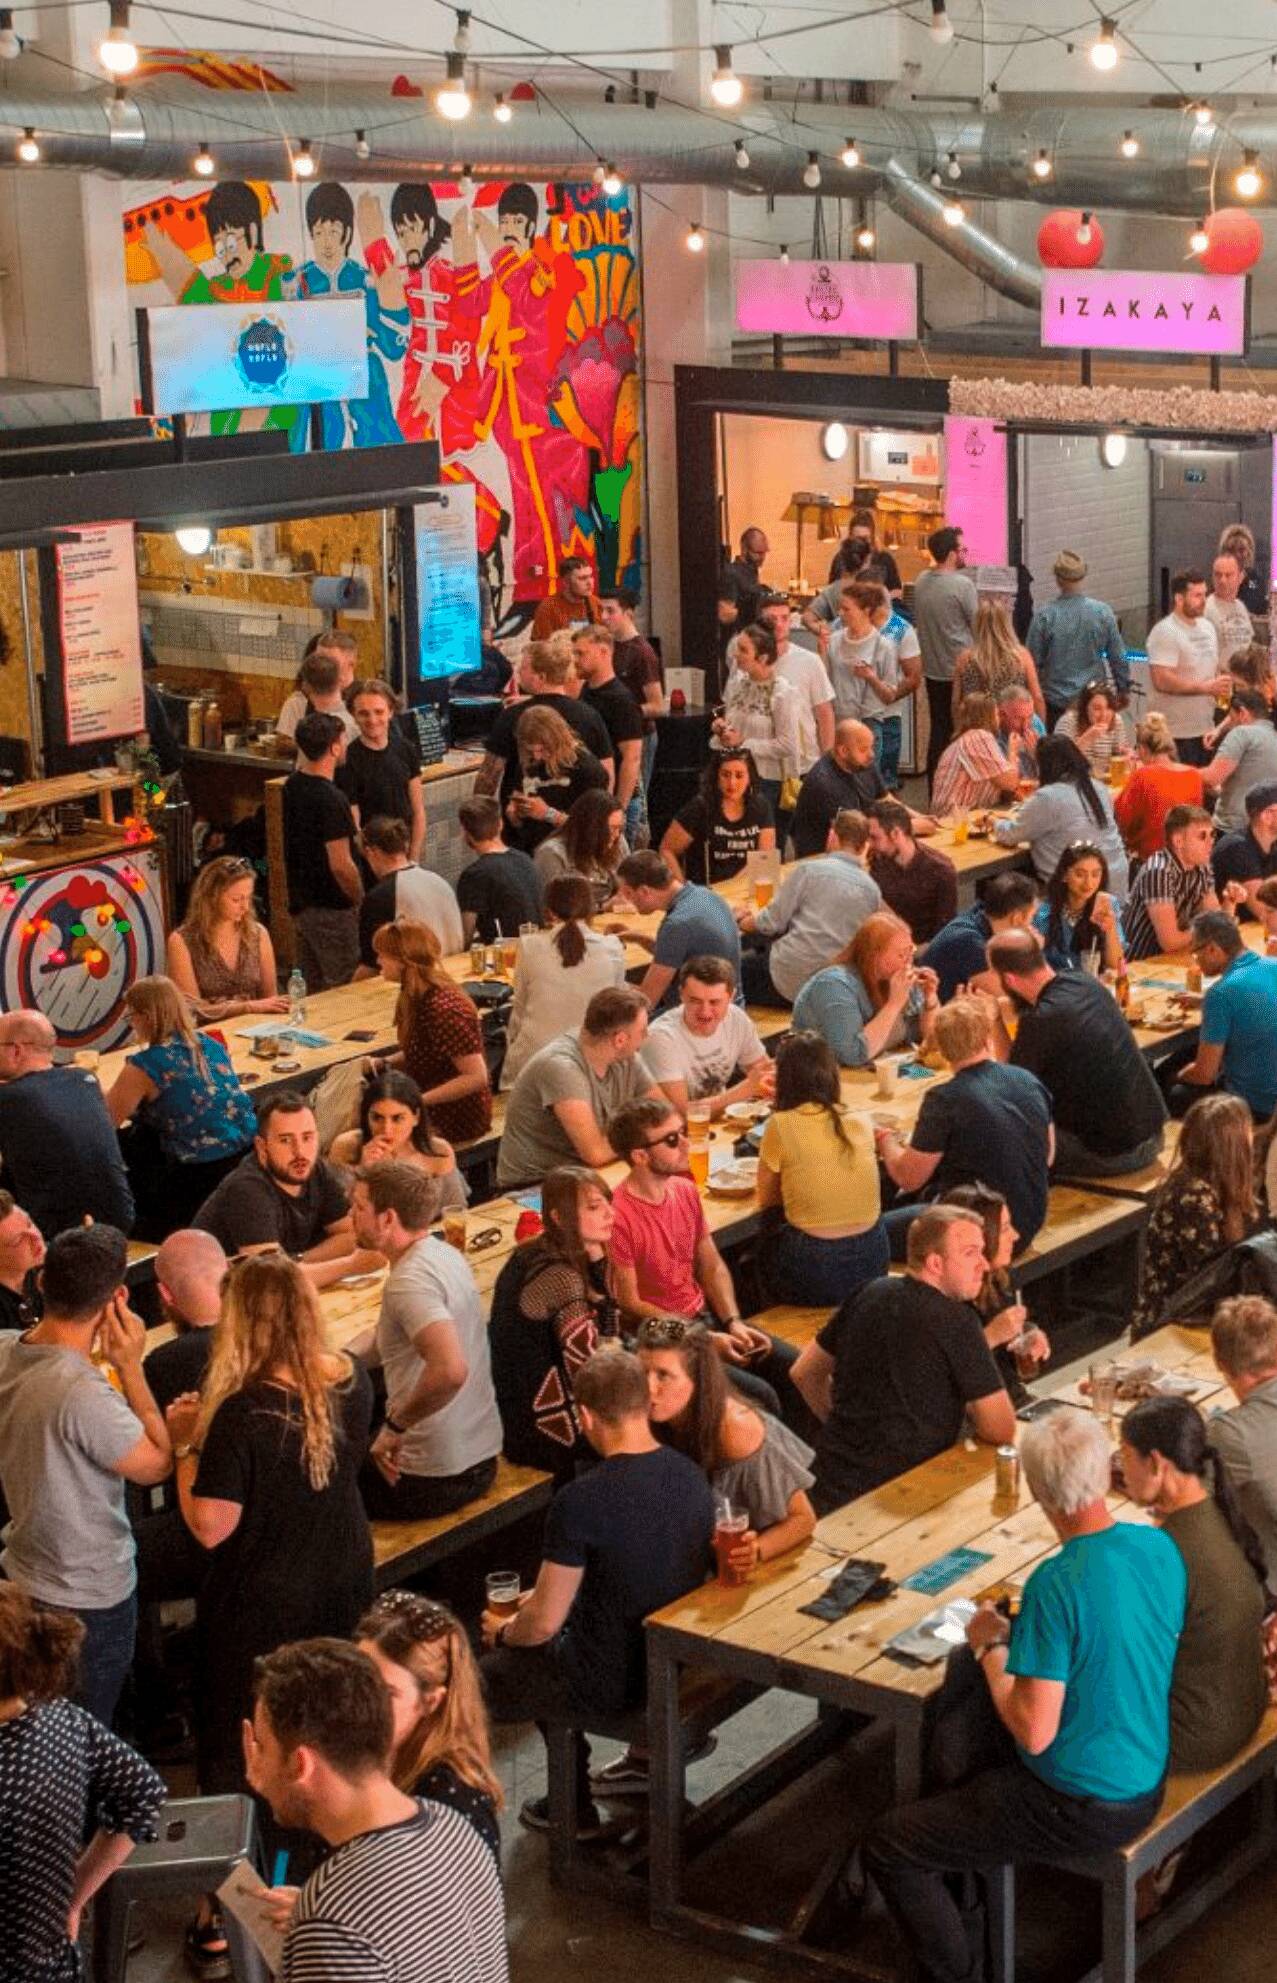 fully occupied seats and tables in Baltic Triangle. The food hall is fully occupied with students who came to eat, drink, and party the night away.